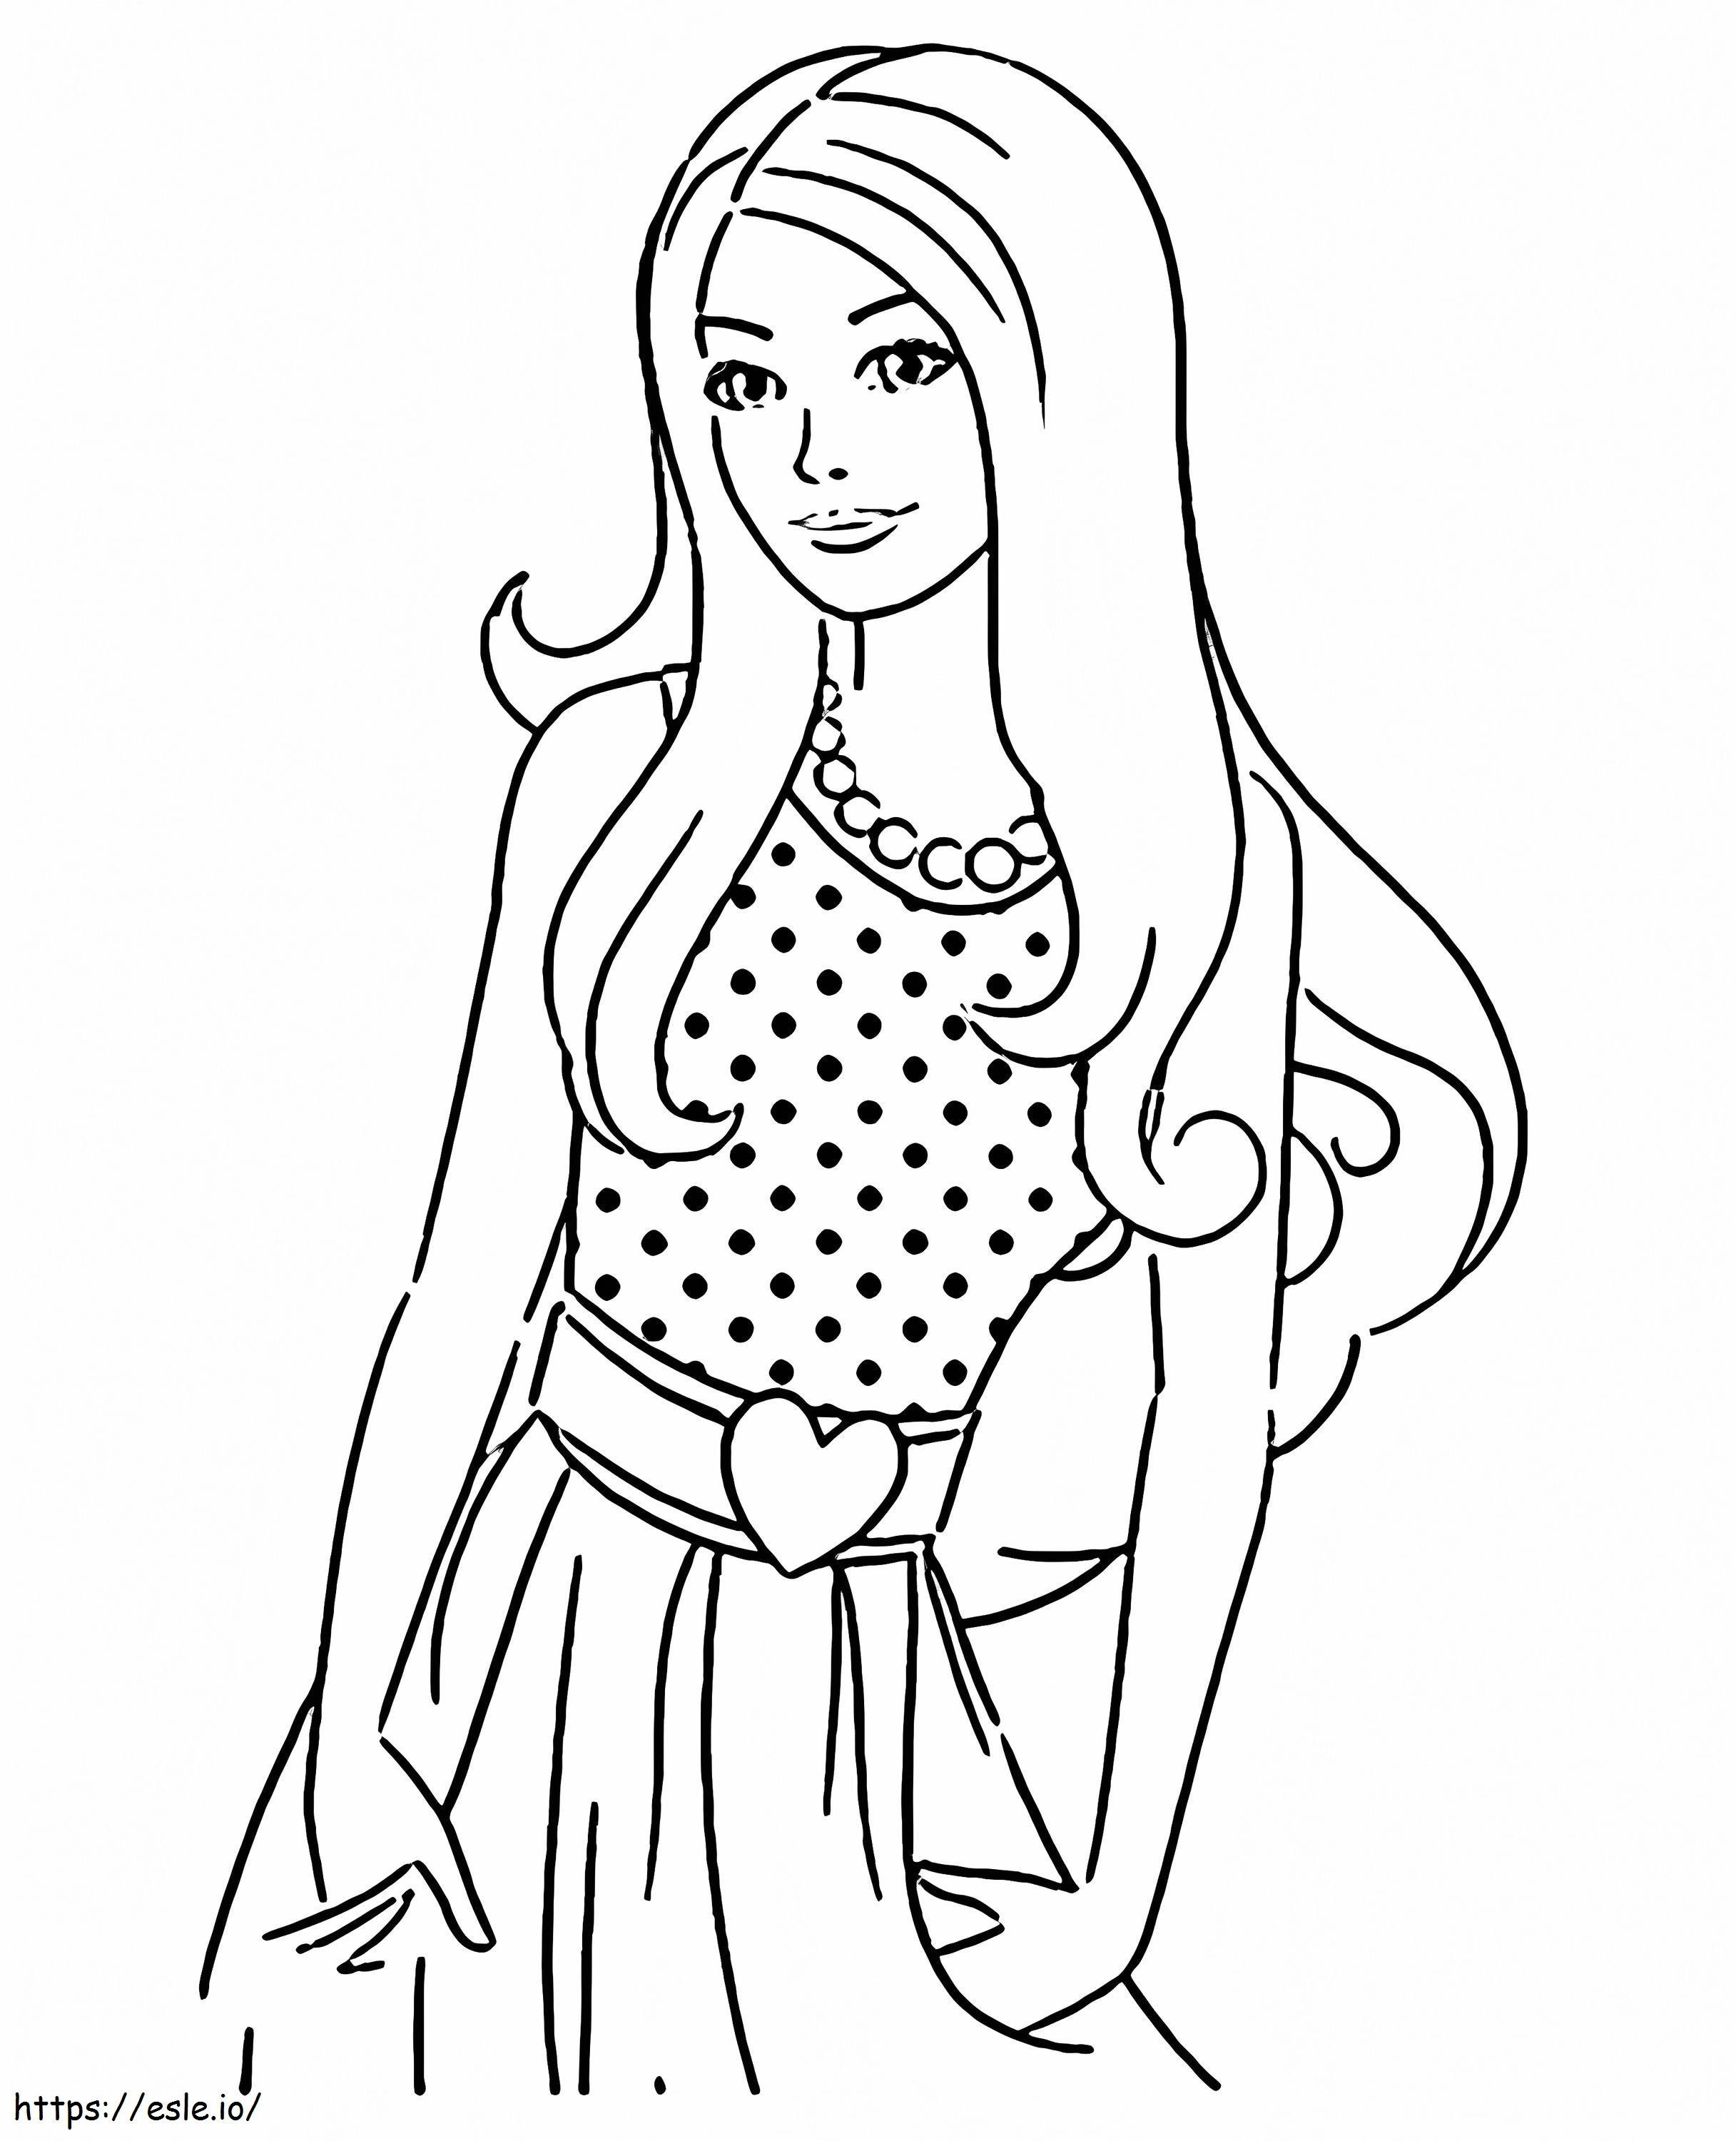 Barbie 3 coloring page